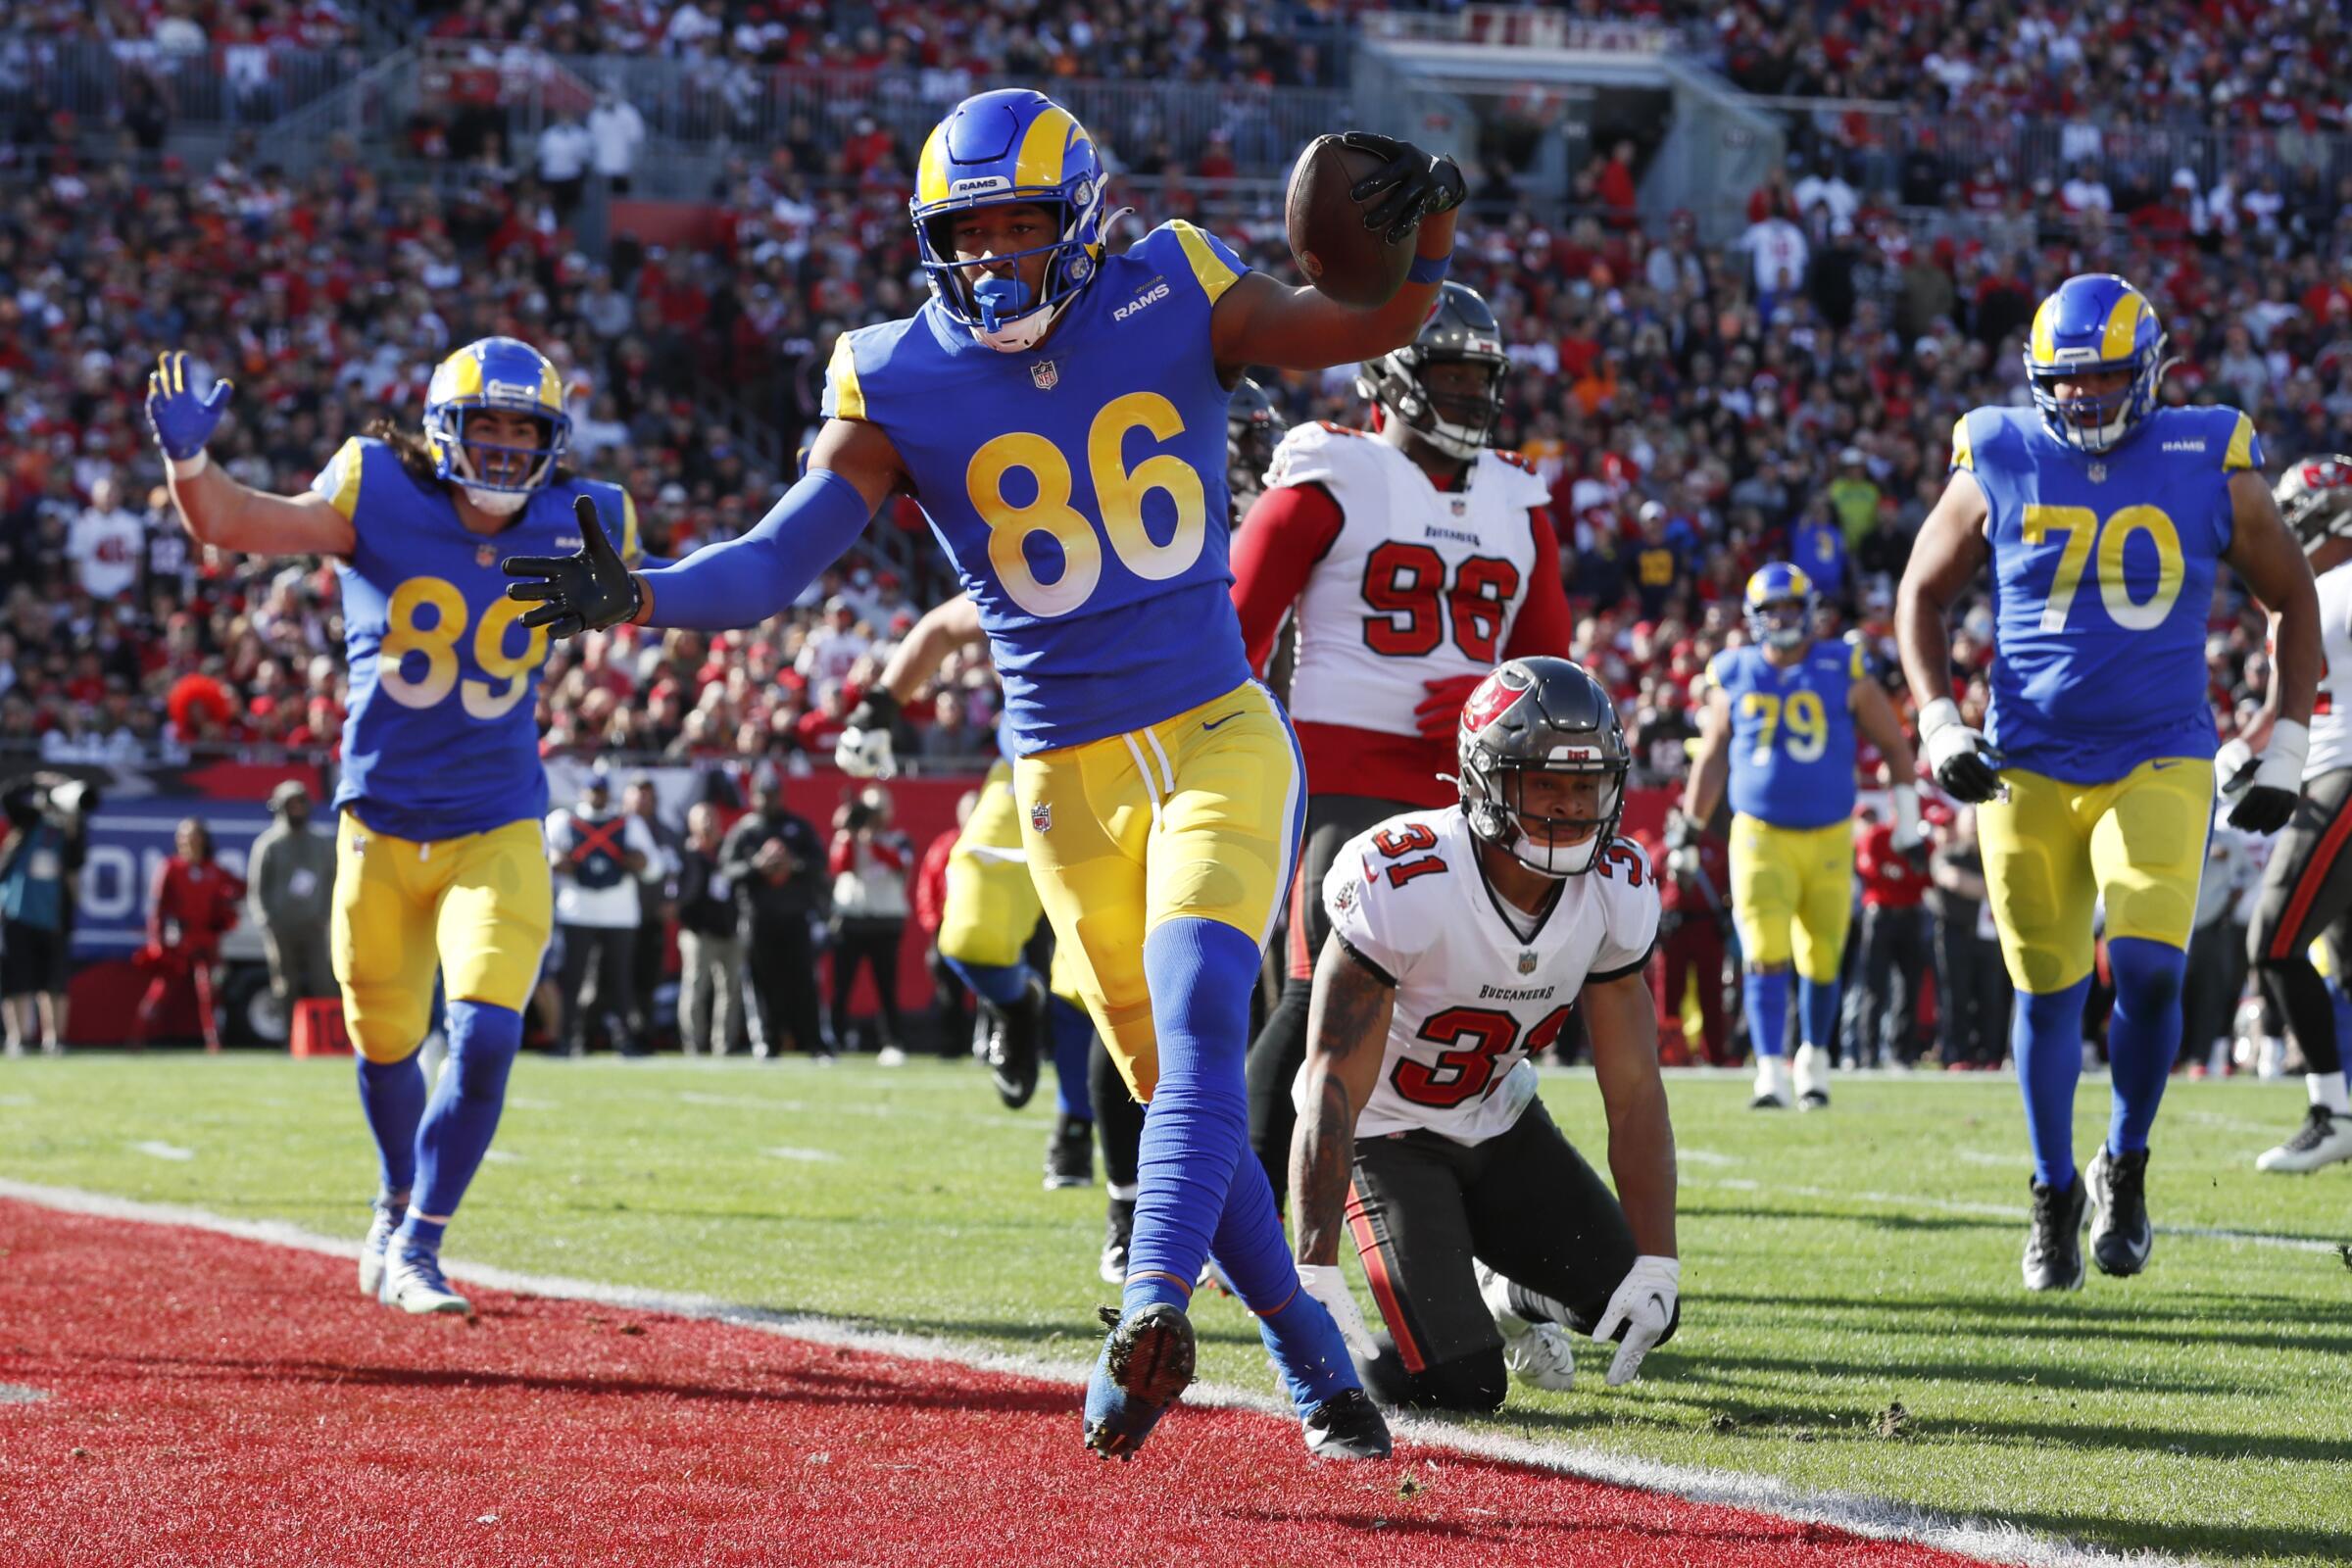 Rams tight end Kendall Blanton scores a first-quarter touchdown during a 30-27 win over the Tampa Bay Buccaneers.